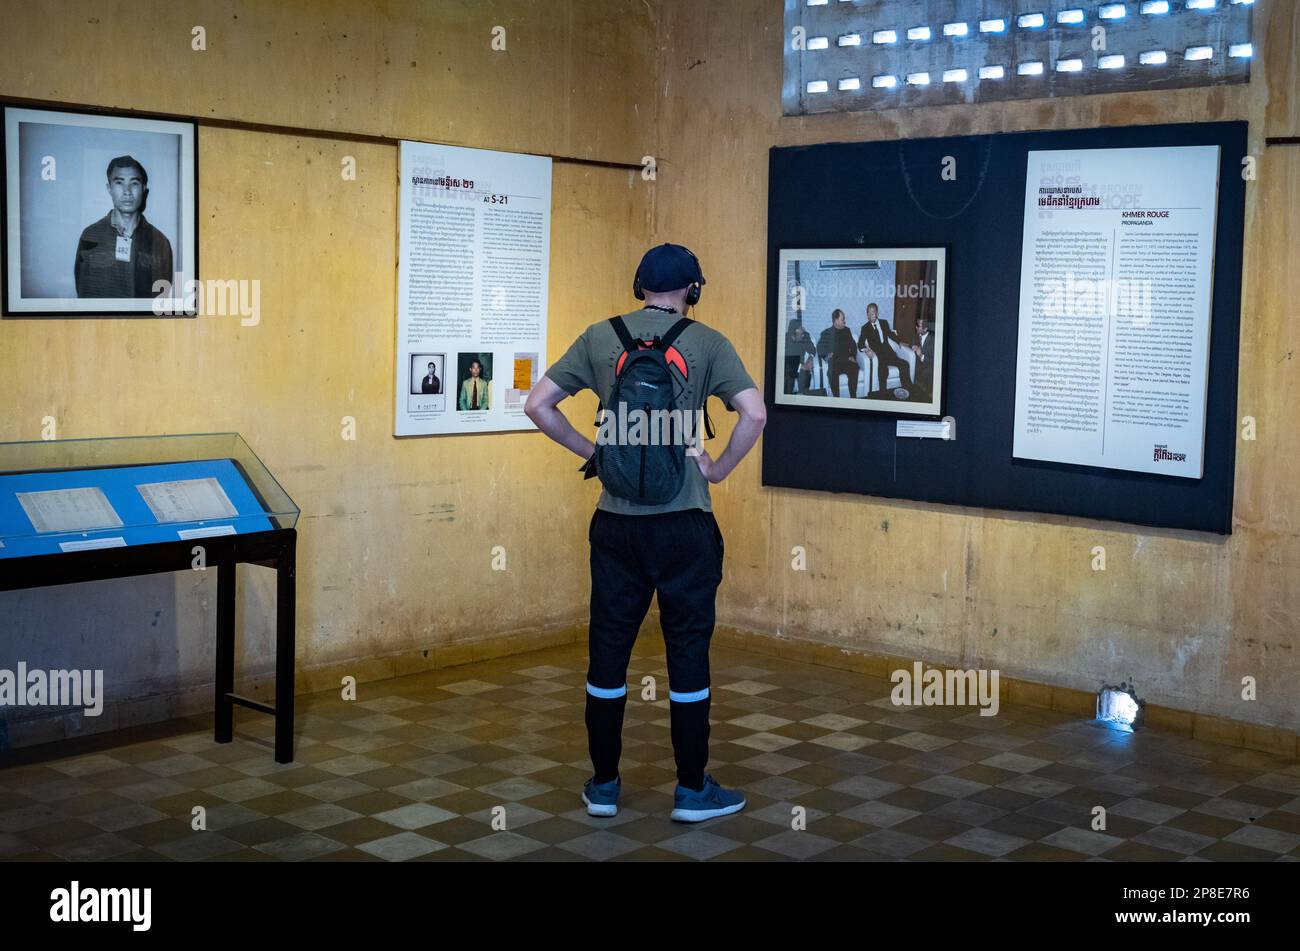 A western tourist looks at displays in a former classroom in the notorious Tuol Sleng S-21 torture and genocide prison museum in Phnom Penh, Cambodia Stock Photo